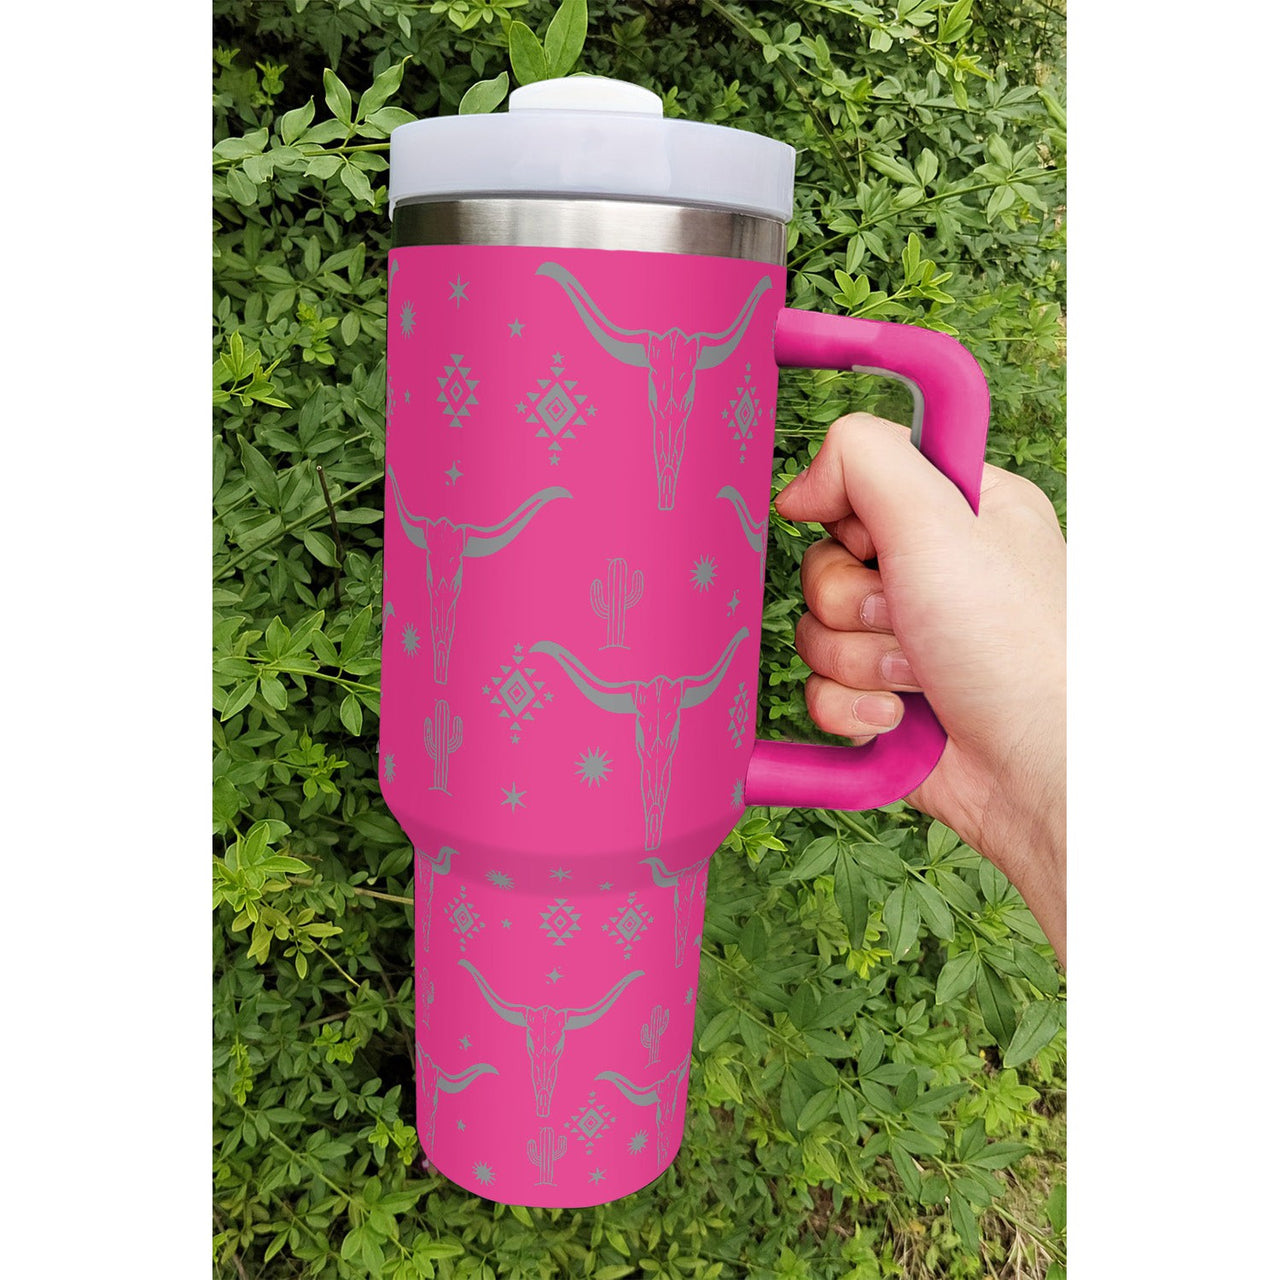 Dear Lover 40oz Western Horn Stainless Steel Handled Insulated Cup - Rose Red